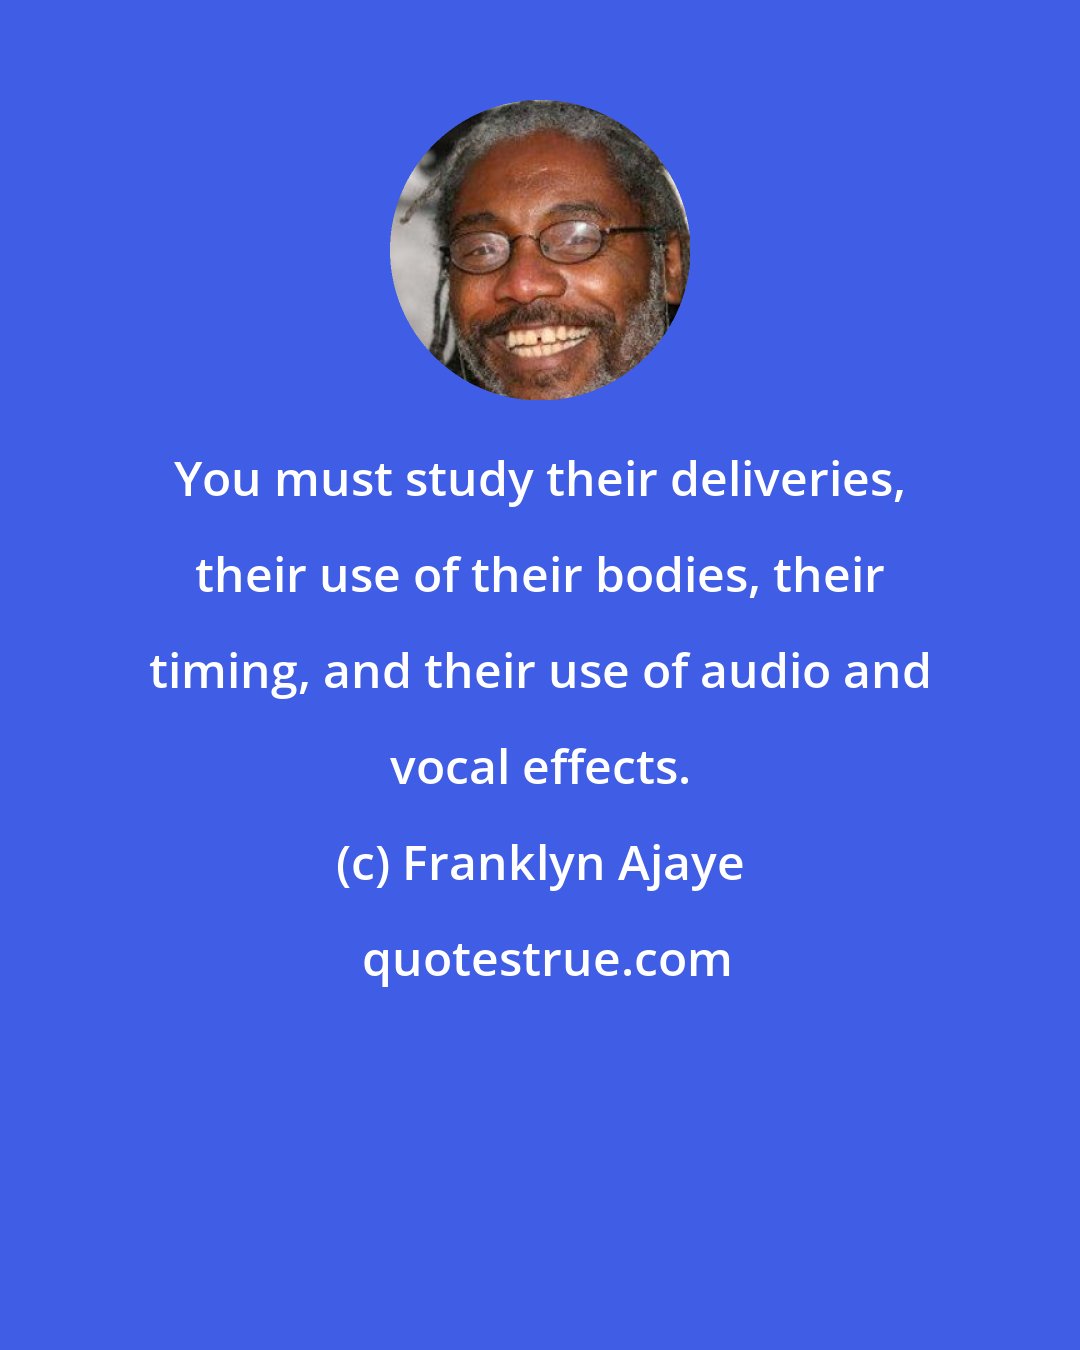 Franklyn Ajaye: You must study their deliveries, their use of their bodies, their timing, and their use of audio and vocal effects.